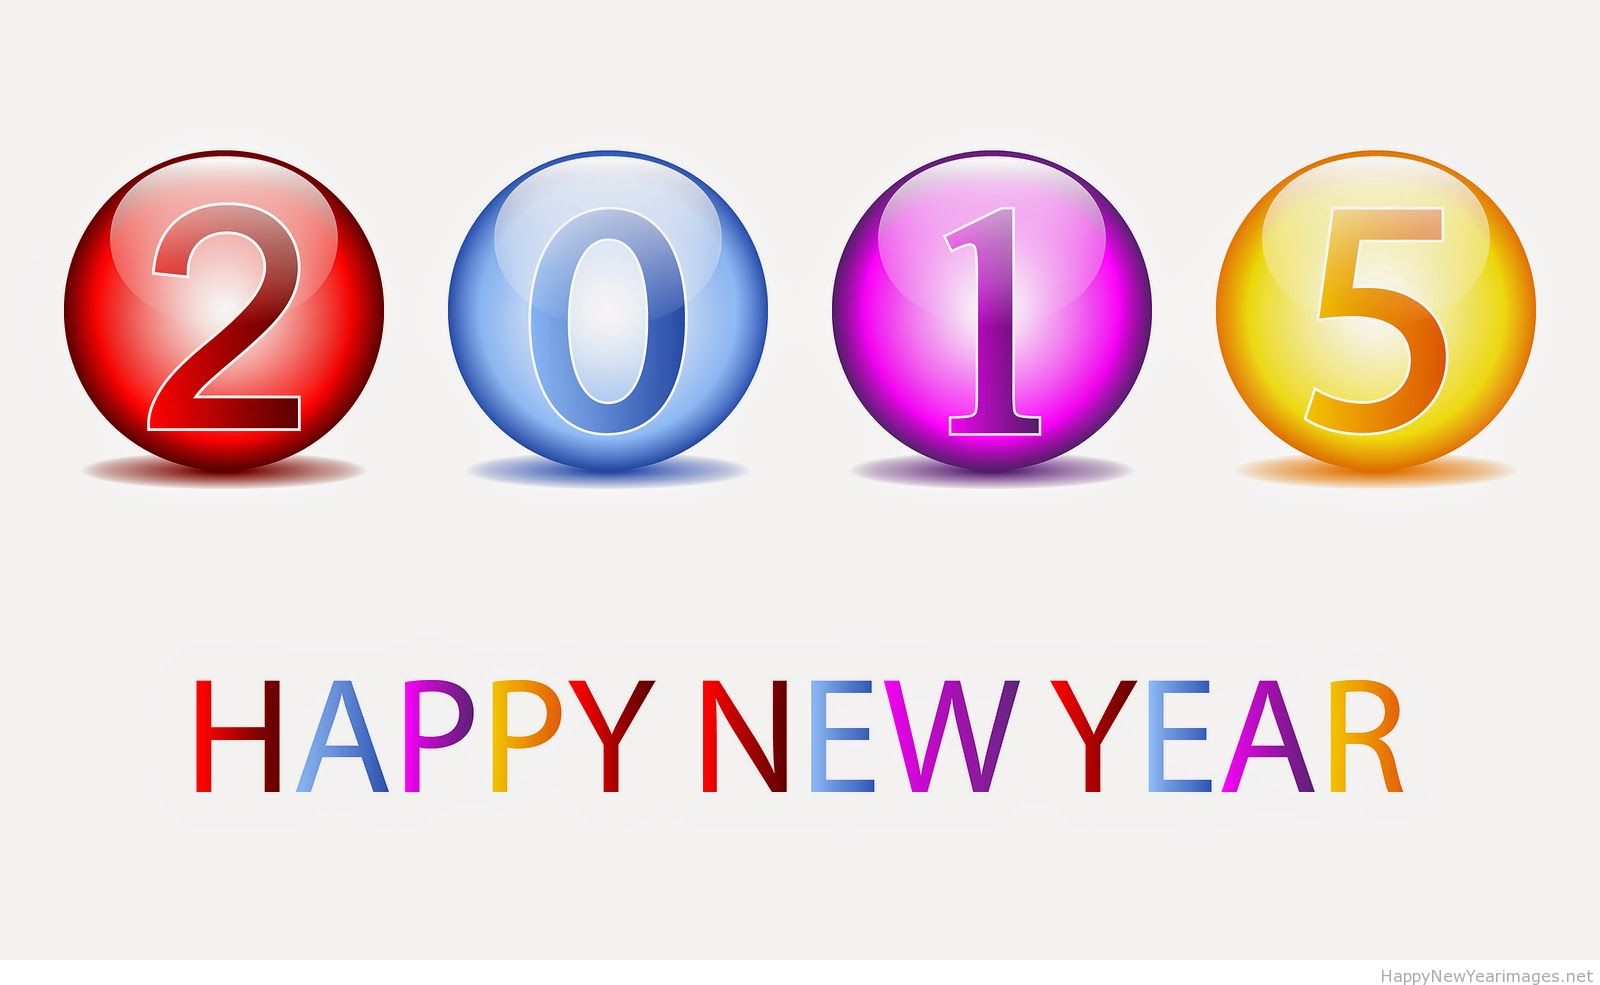 Free clipart images for new years